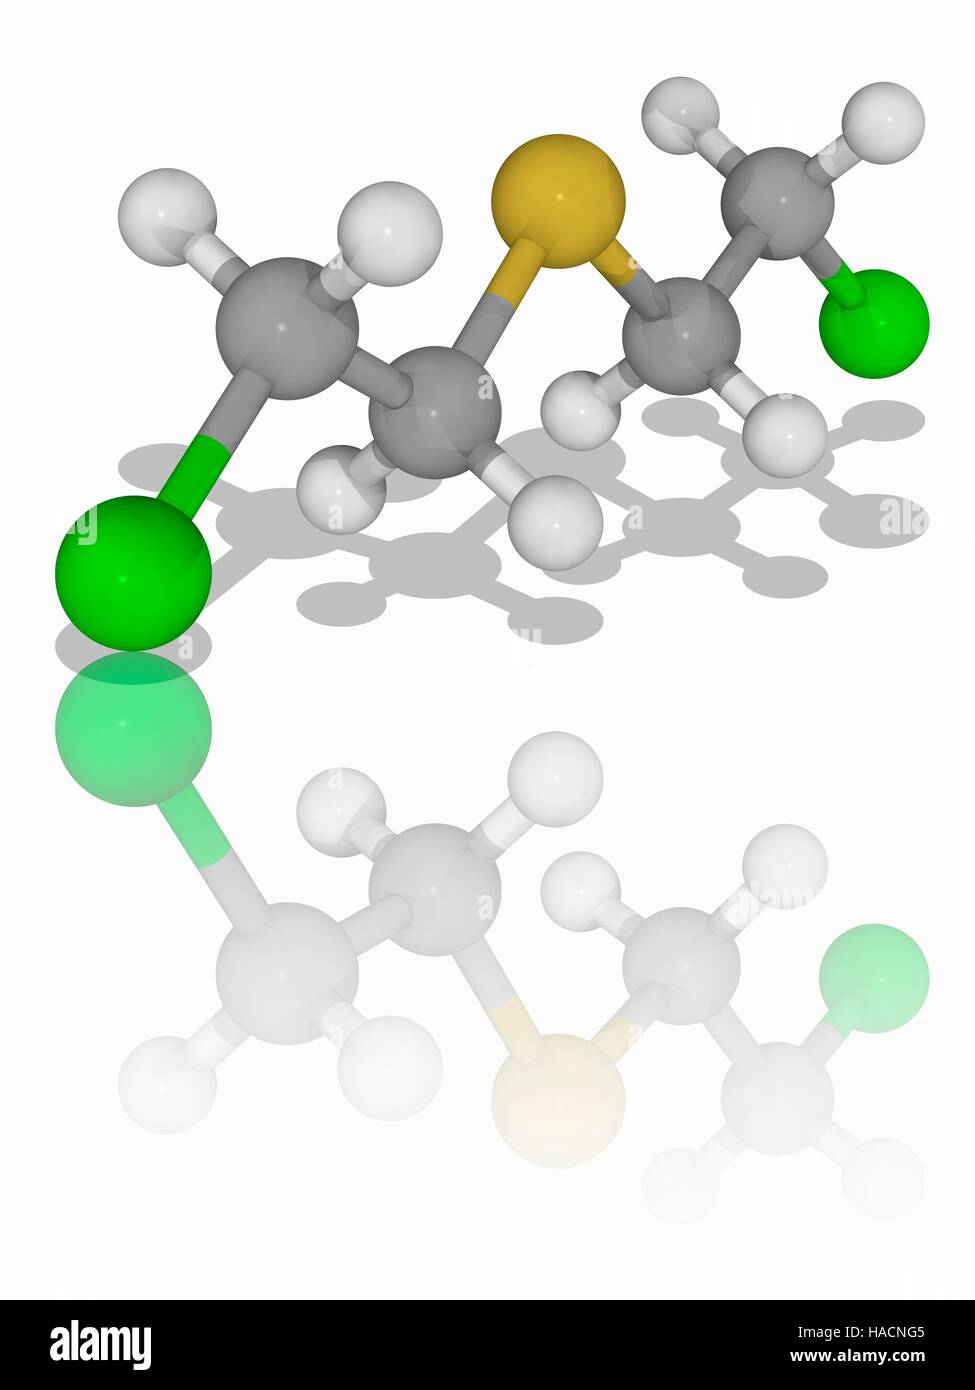 Mustard gas. Molecular model of sulphur mustard (C4.H8.Cl2.S), known as mustard gas. This chemical warfare agent forms large blisters on exposed skin and in the lungs. Atoms are represented as spheres and are colour-coded: carbon (grey), hydrogen (white), sulphur (yellow) and chlorine (green). Illustration. Stock Photo